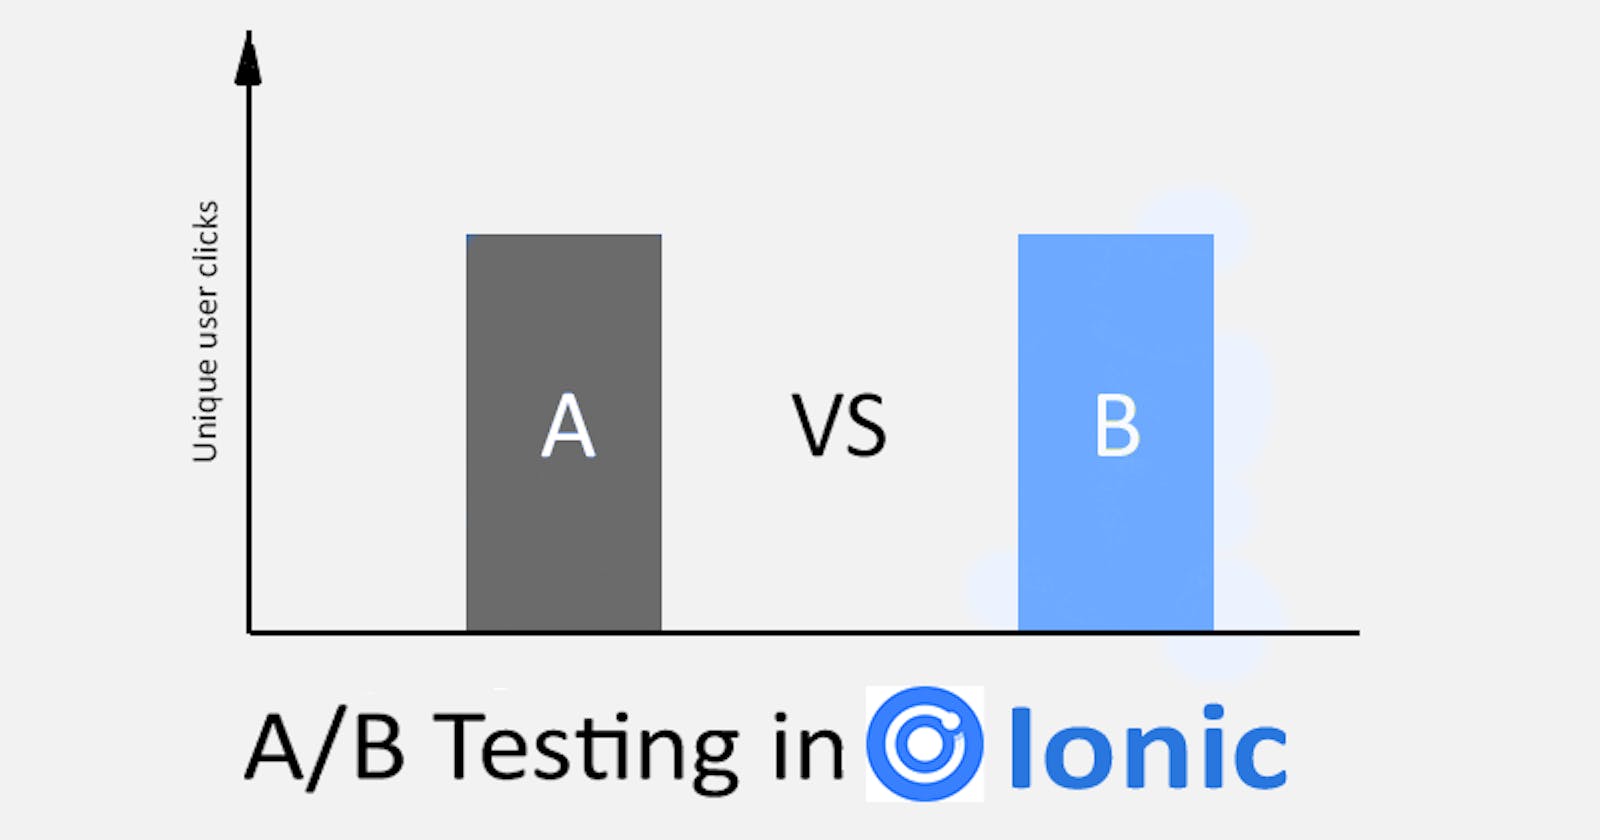 How to implement A/B testing in Ionic